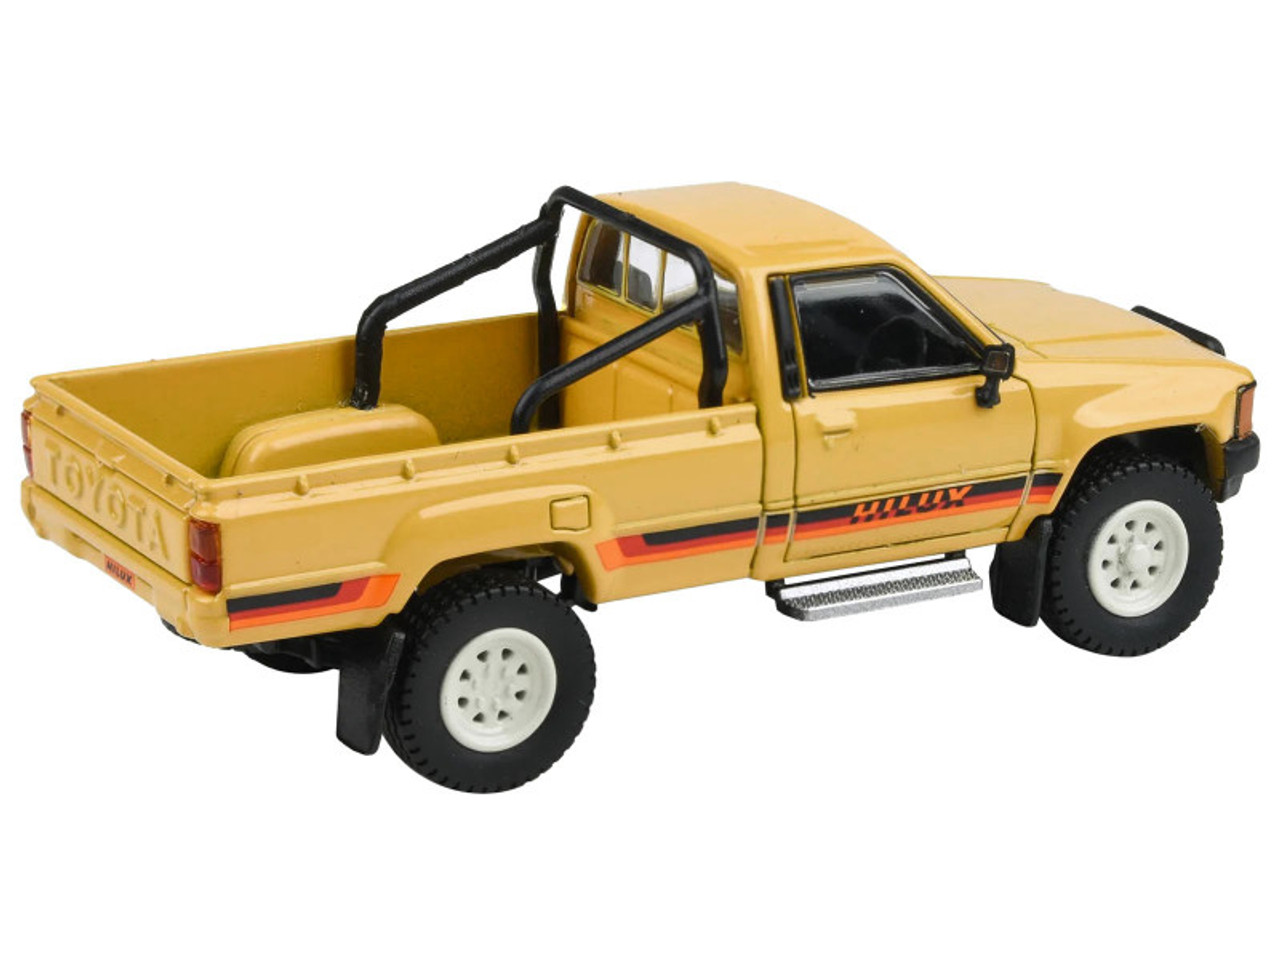 1984 Toyota Hilux Pickup Truck Yellow with Stripes 1/64 Diecast Model Car by Paragon Models